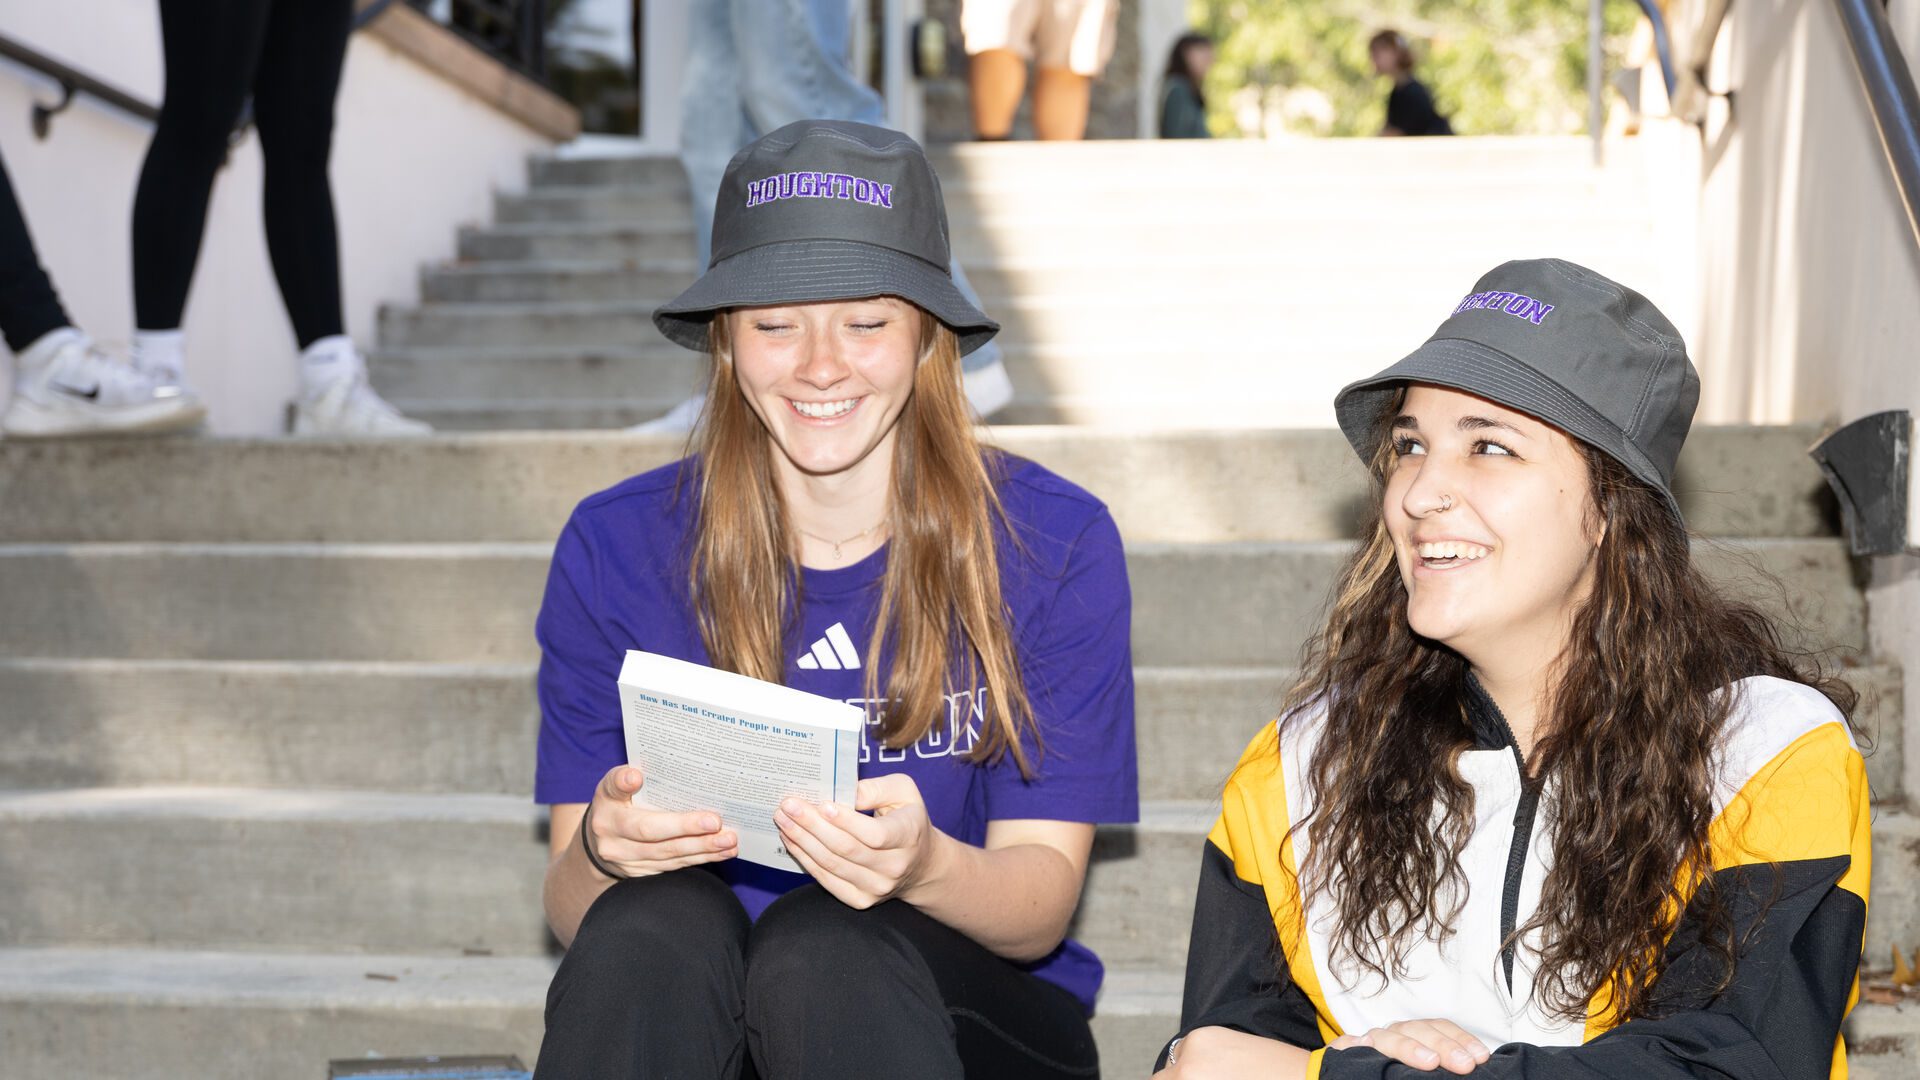 Two Houghton students sitting on the steps wearing Houghton gear and Houghton bucket hats.